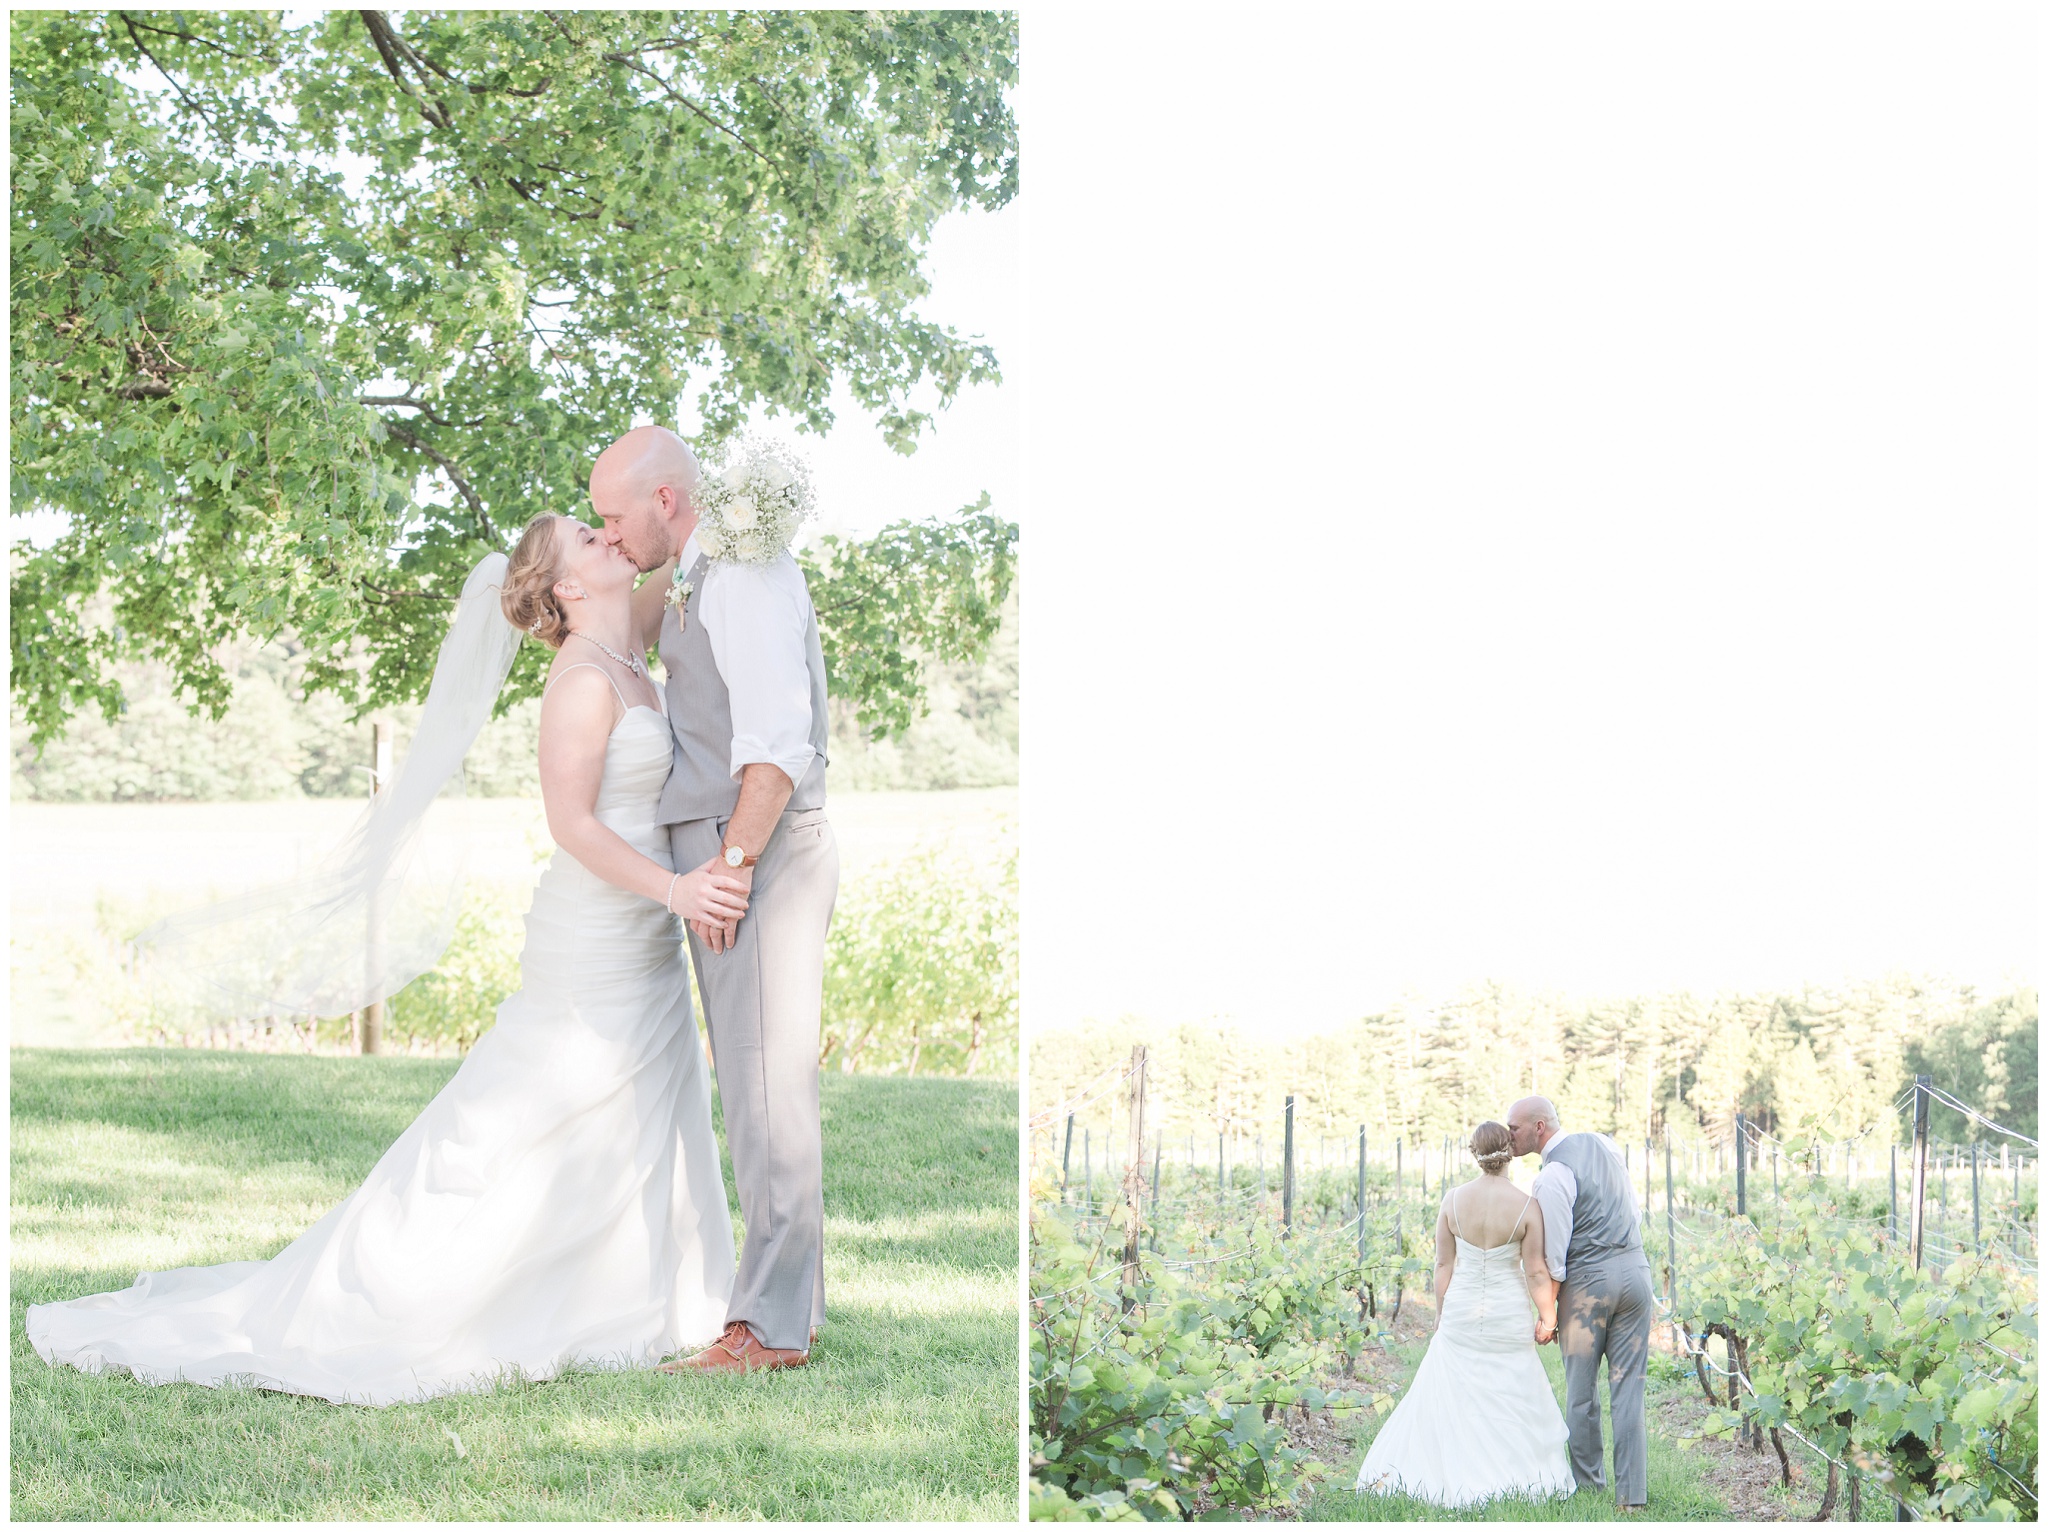 New Hampshire Vineyard Wedding | Amy Brown Photography | Seacoast NH Wedding Photographer | Flag Hill Winery And Distillery